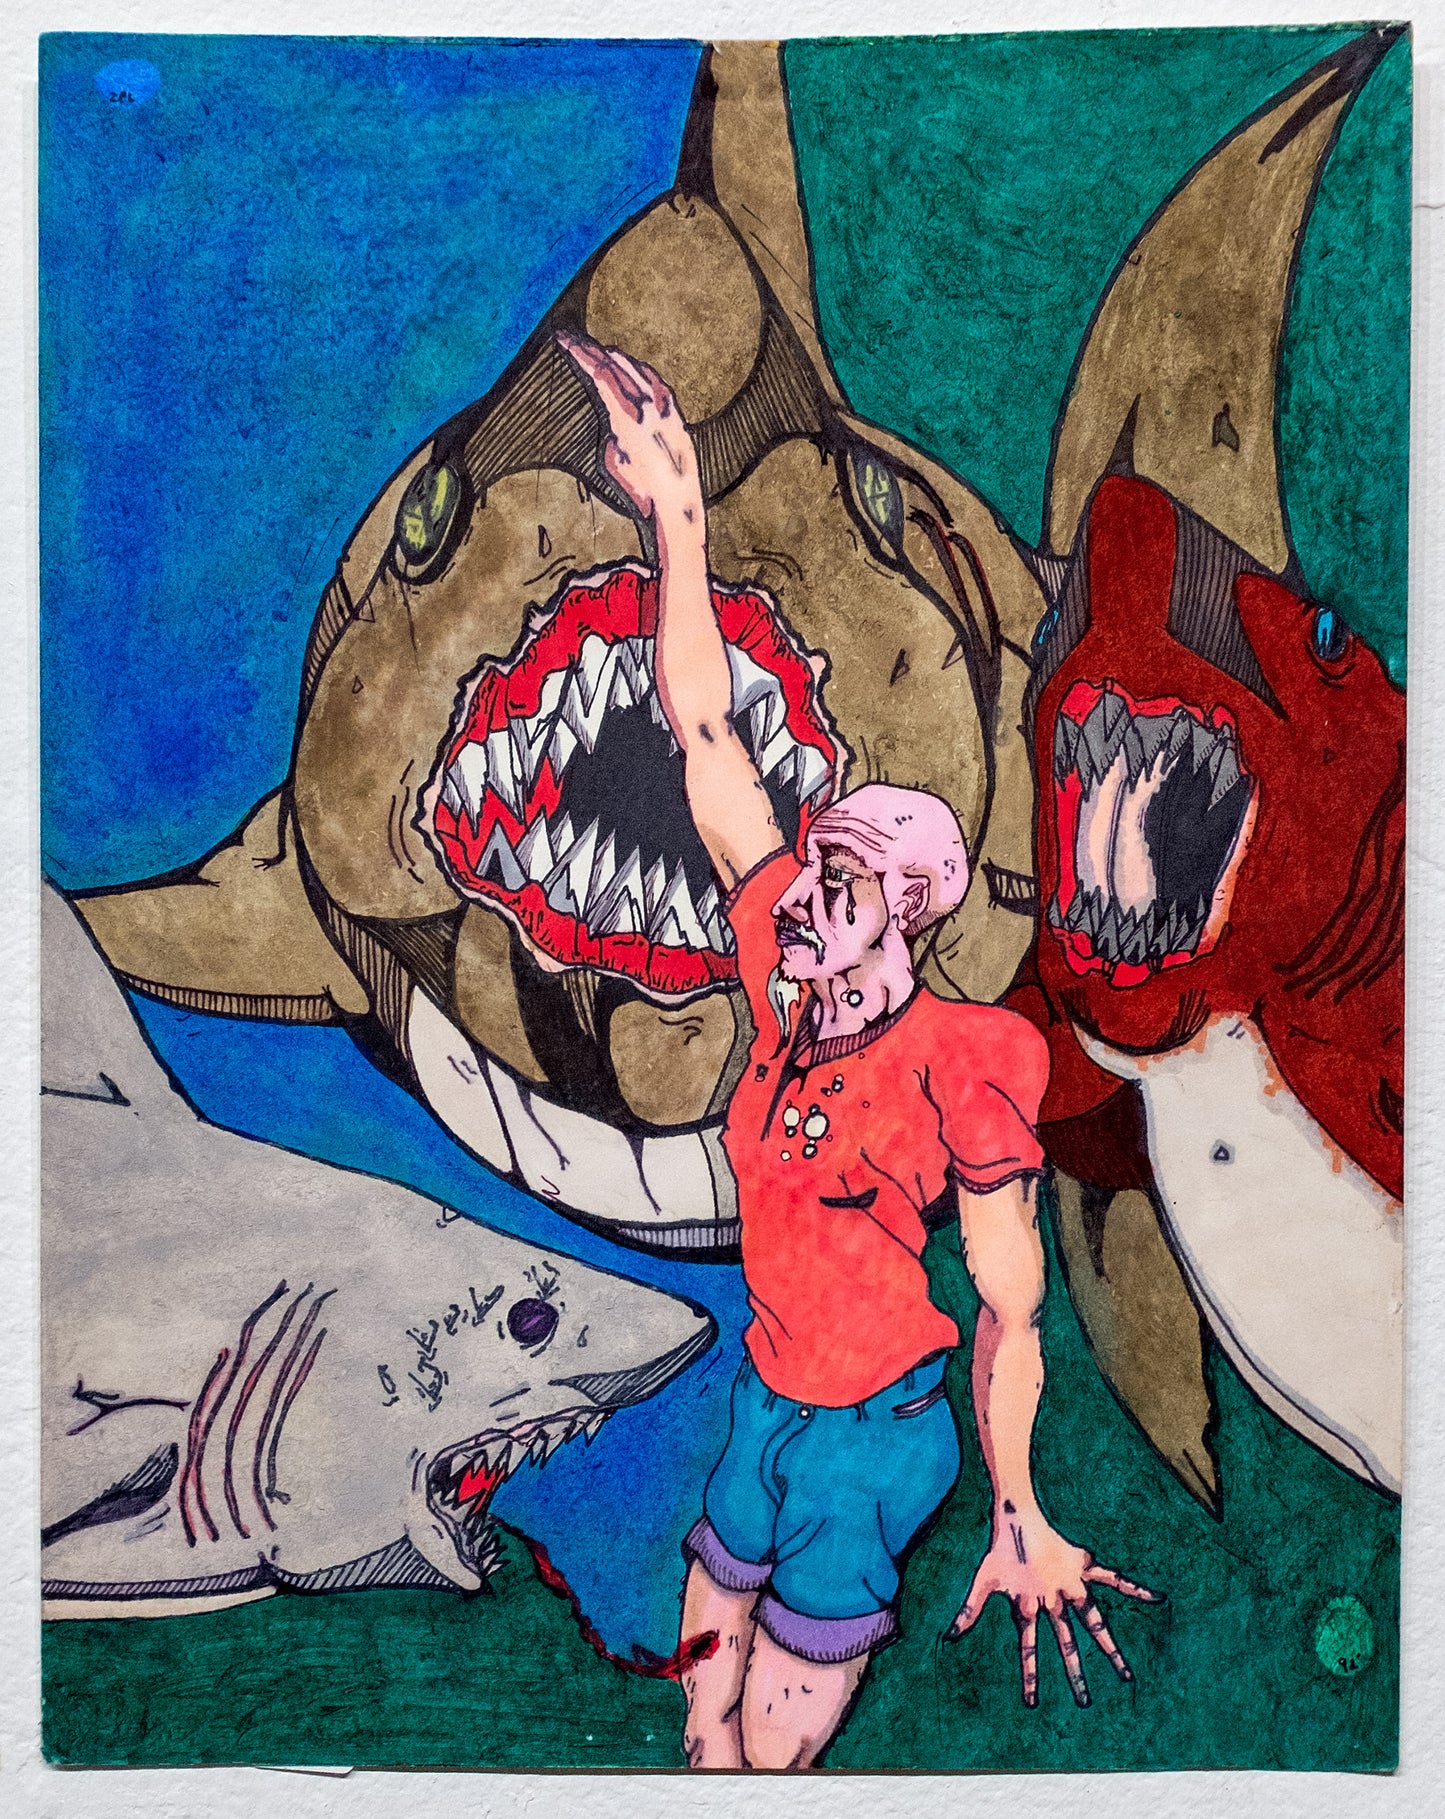 The Old Man Swimming with the Sharks by Zack Luchetti